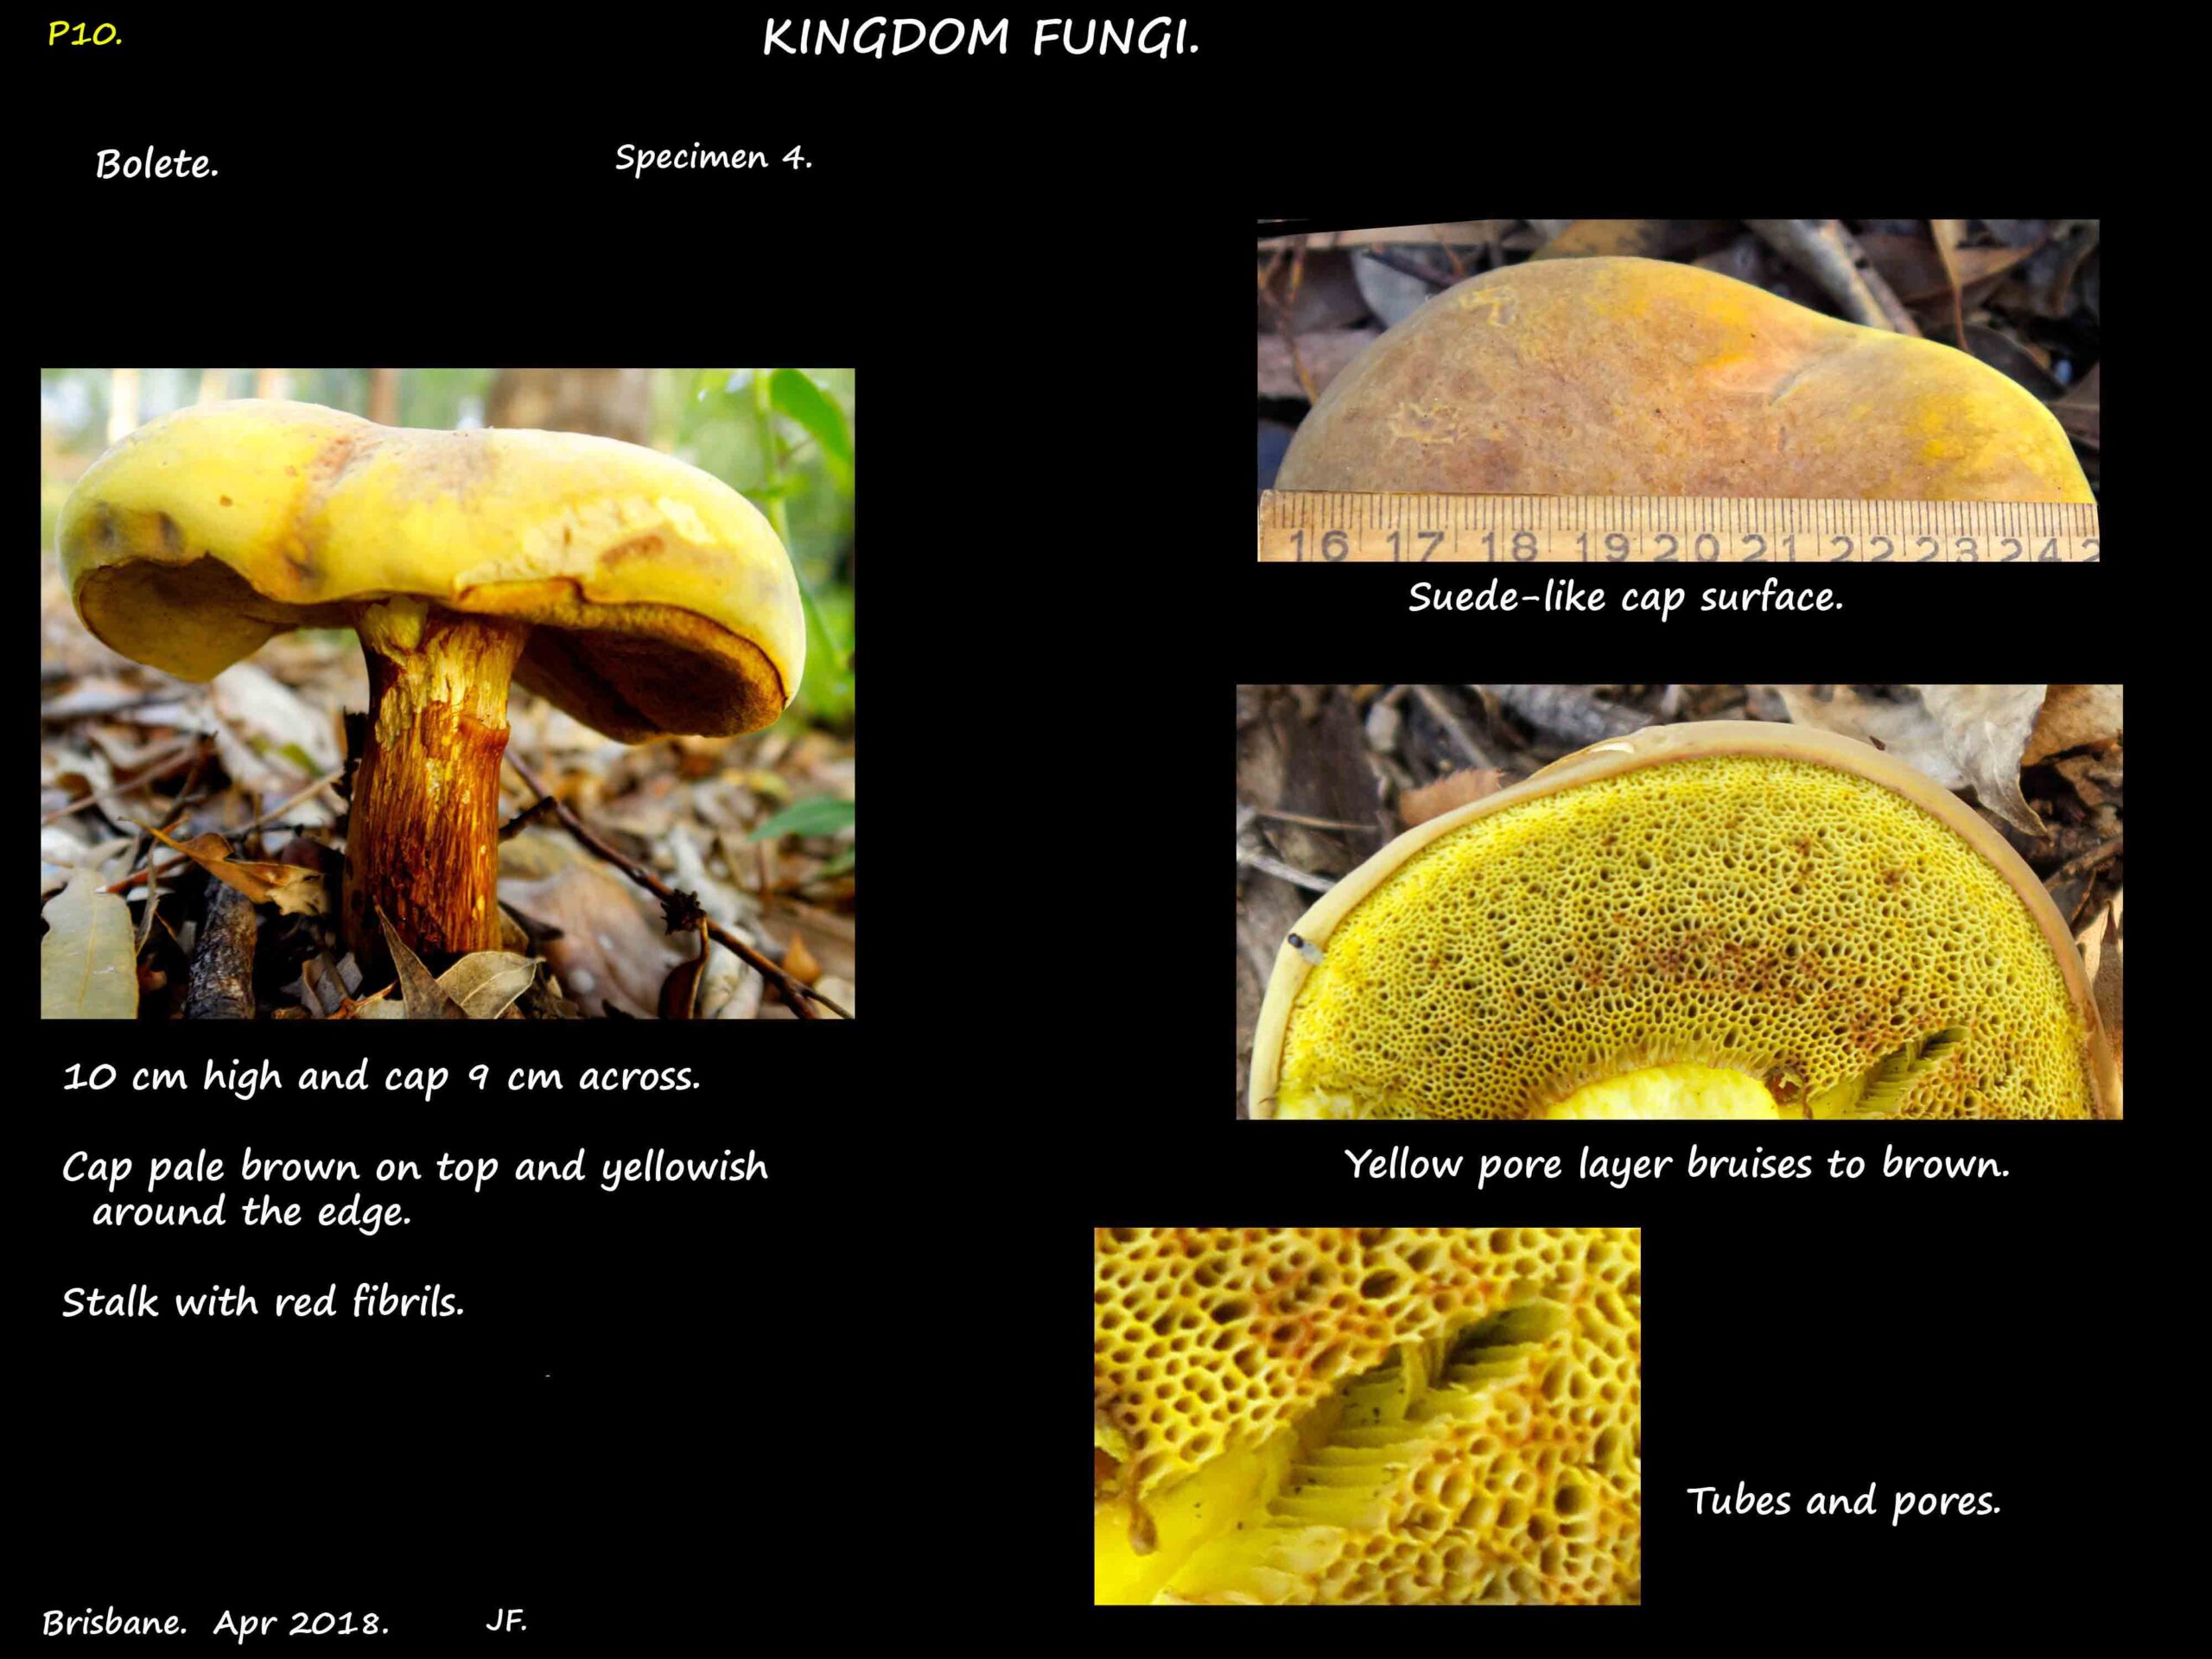 4 The bruised pore surface of a Bolete